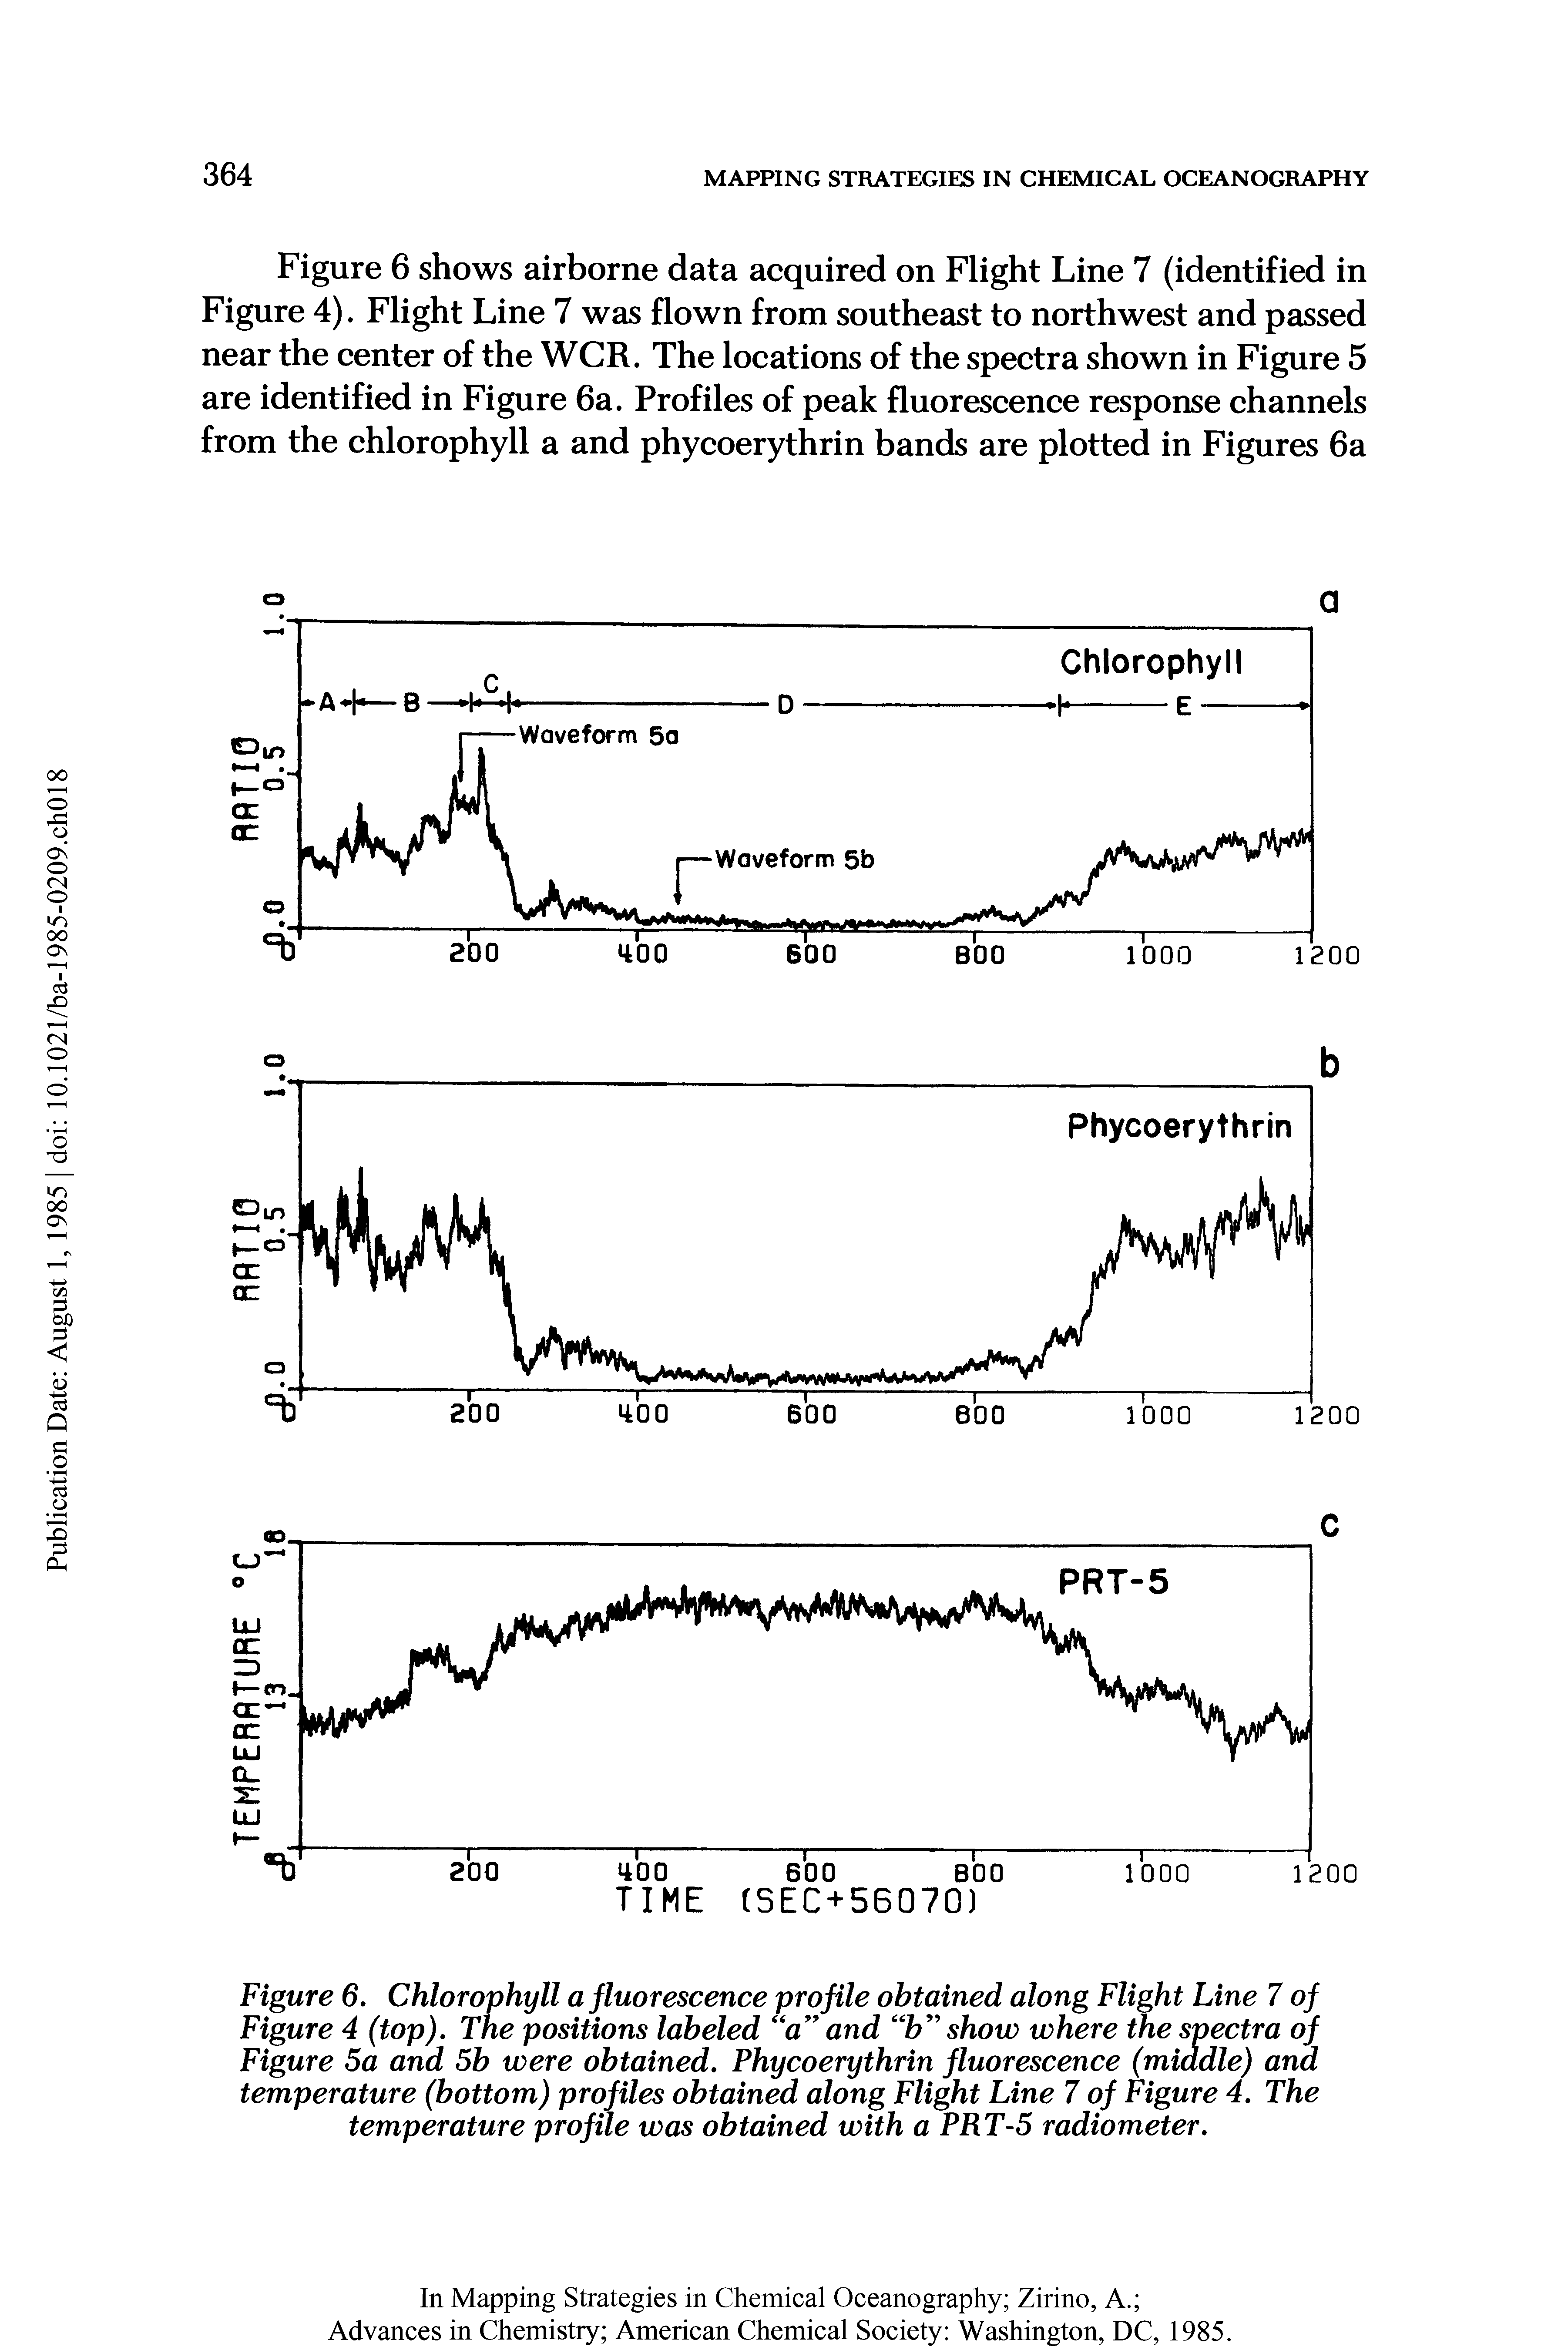 Figure 6. Chlorophyll a fluorescence profile obtained along Flight Line 7 of Figure 4 (top). Tne positions labeled a and K"show where the spectra of Figure 5a and 5b were obtained. Phycoerythrin fluorescence (middle) and temperature (bottom) profiles obtained along Flight Line 7 of Figure 4. The temperature profile was obtained with a PRT-5 radiometer.